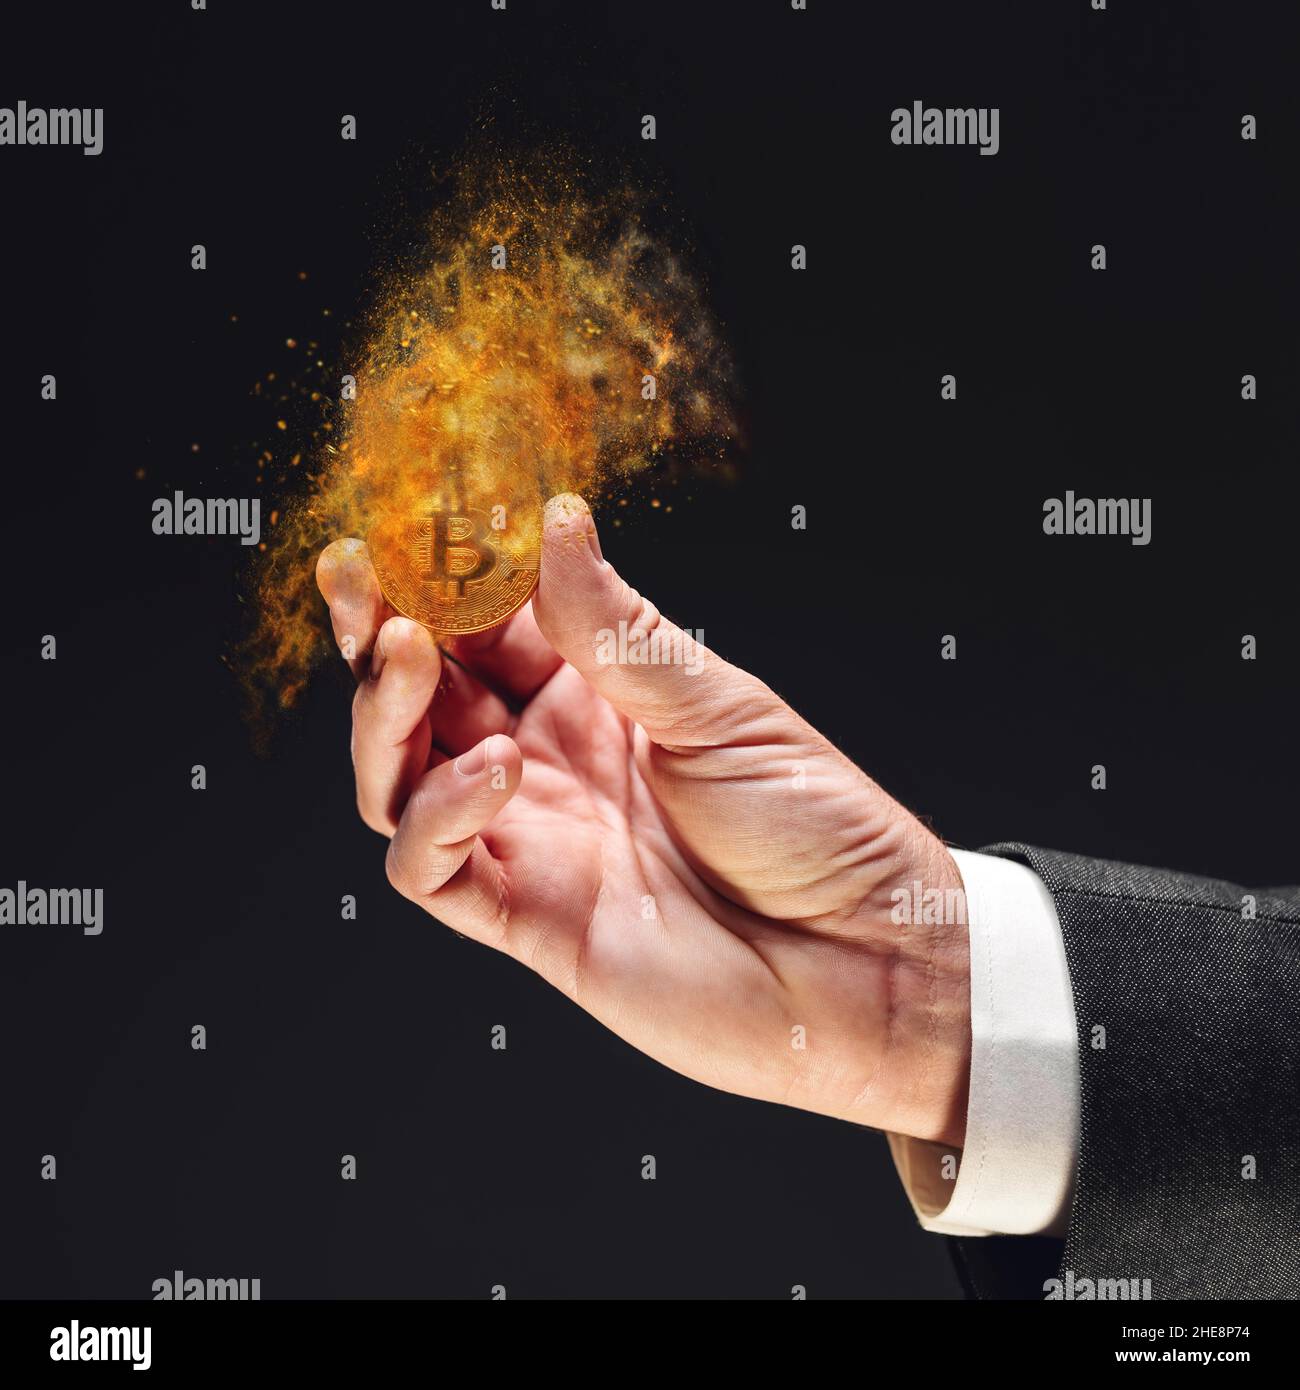 Bitcoin cryptocurrency loosing value, investor holding crypto currency dissolving coin in hand, conceptual image with selective focus Stock Photo